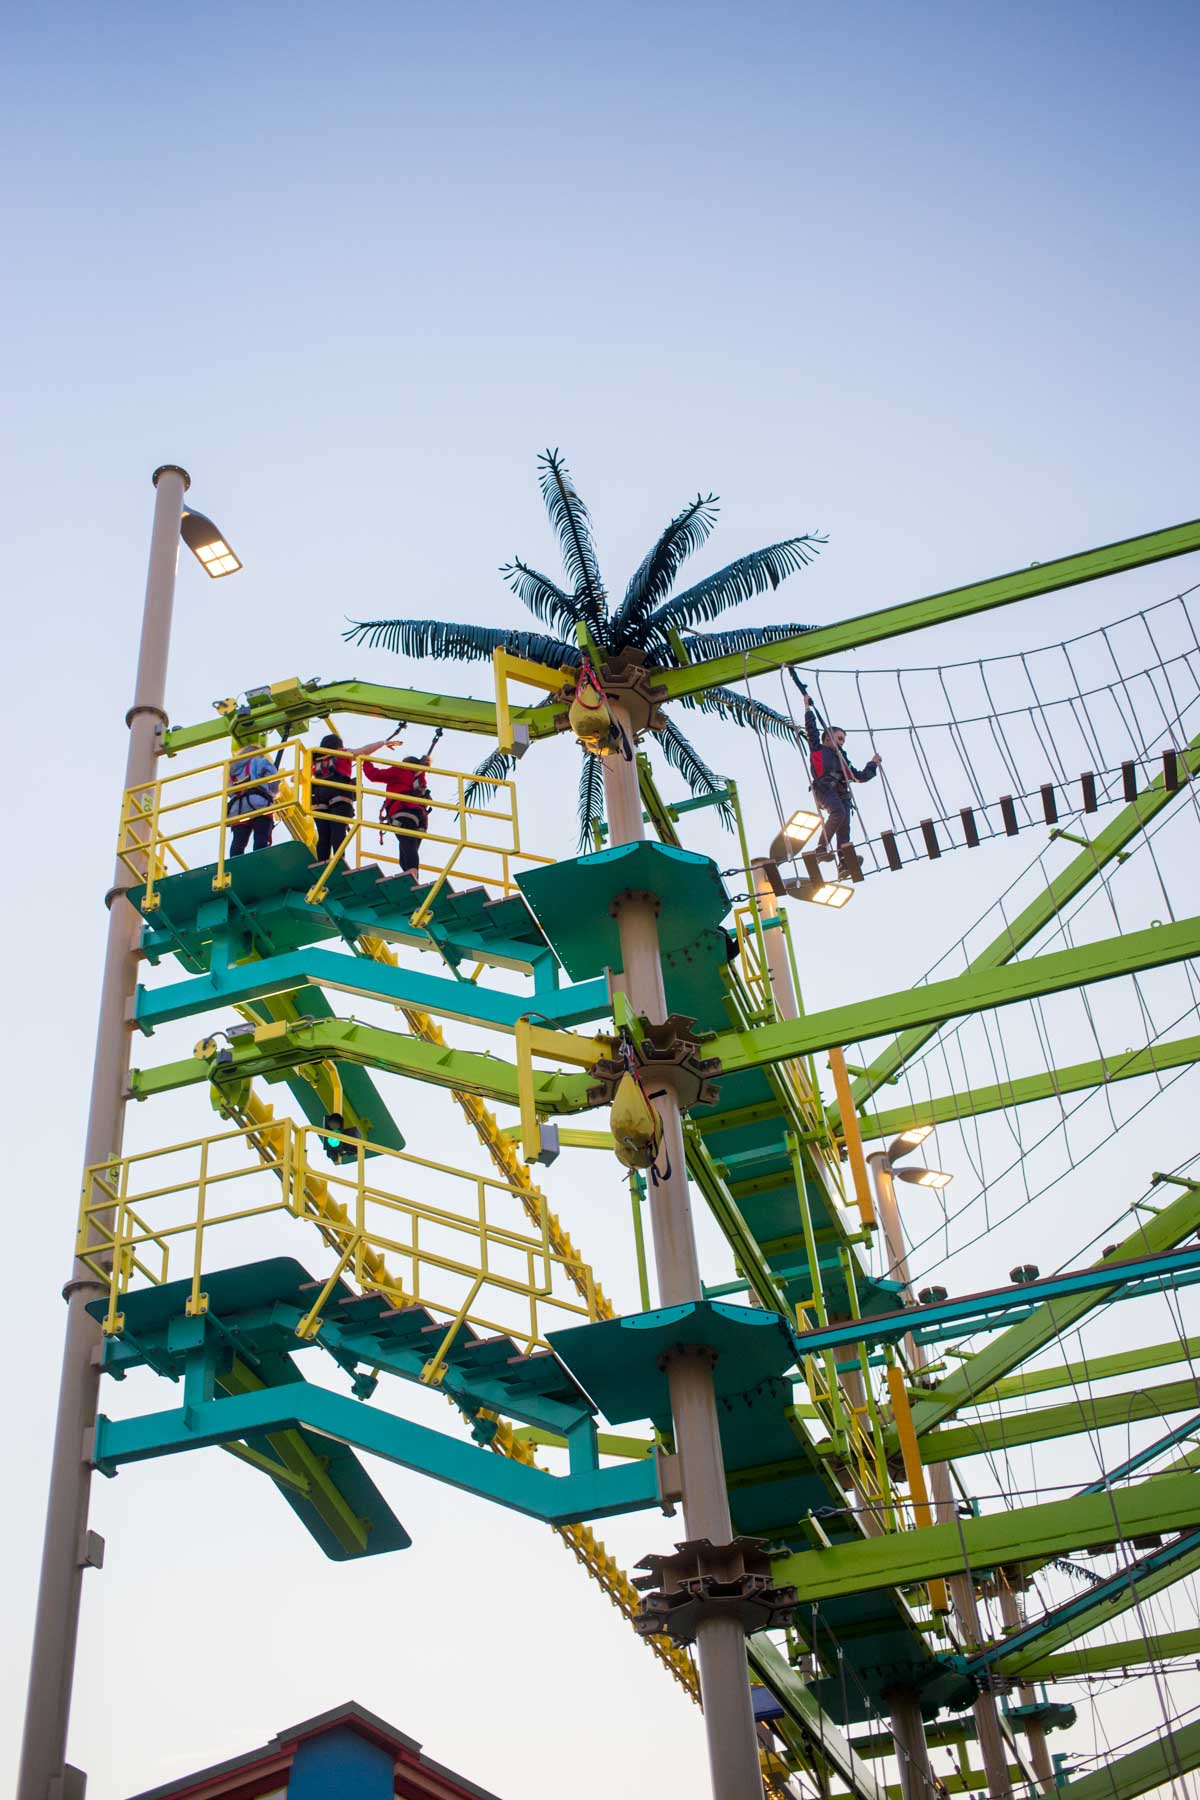 A fun tropical themed rope course with a palm tree on top.